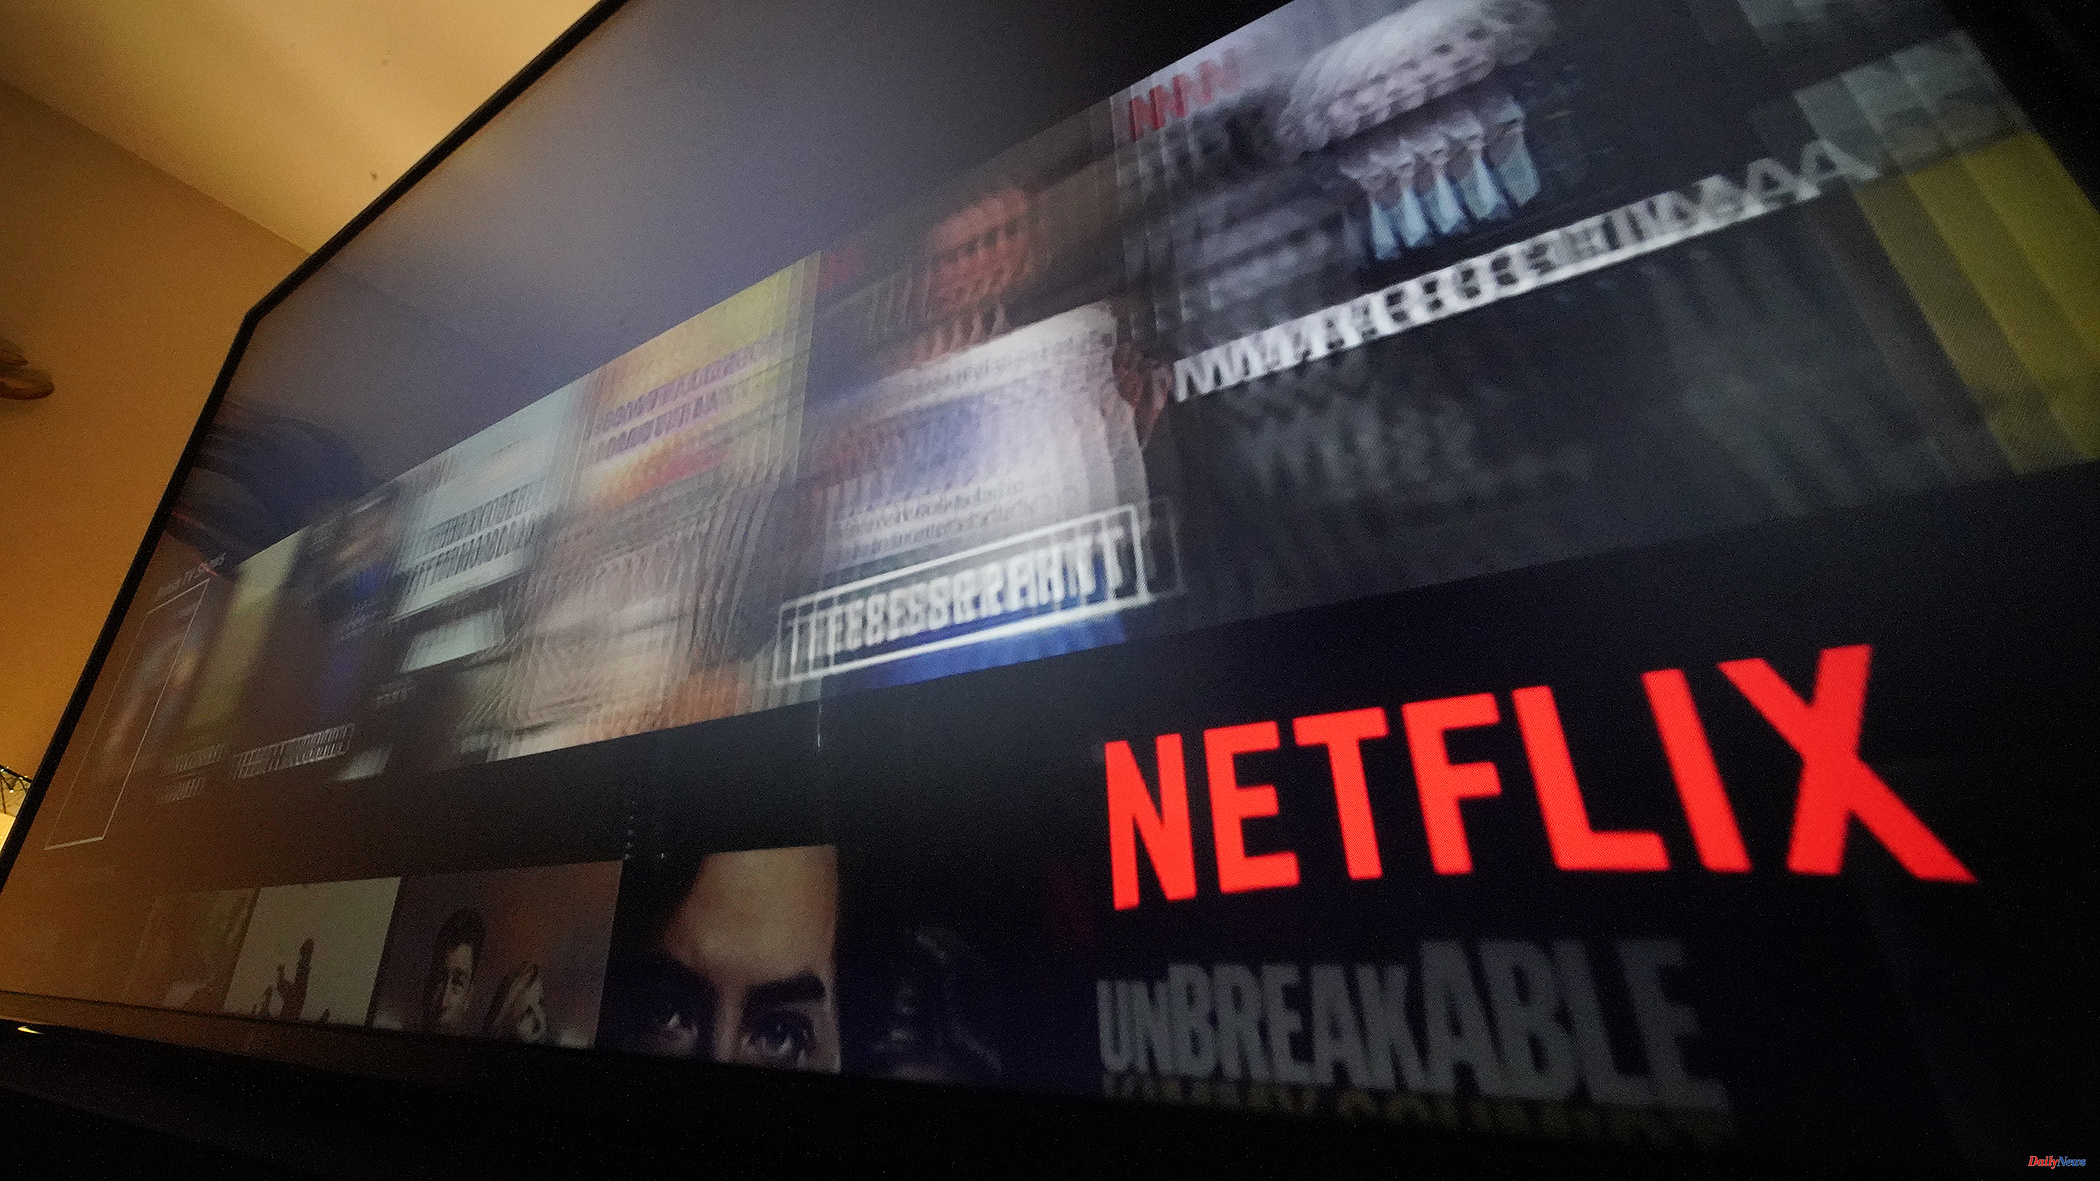 Platforms Netflix cuts its prices in a hundred countries so as not to lose advantage over its competitors